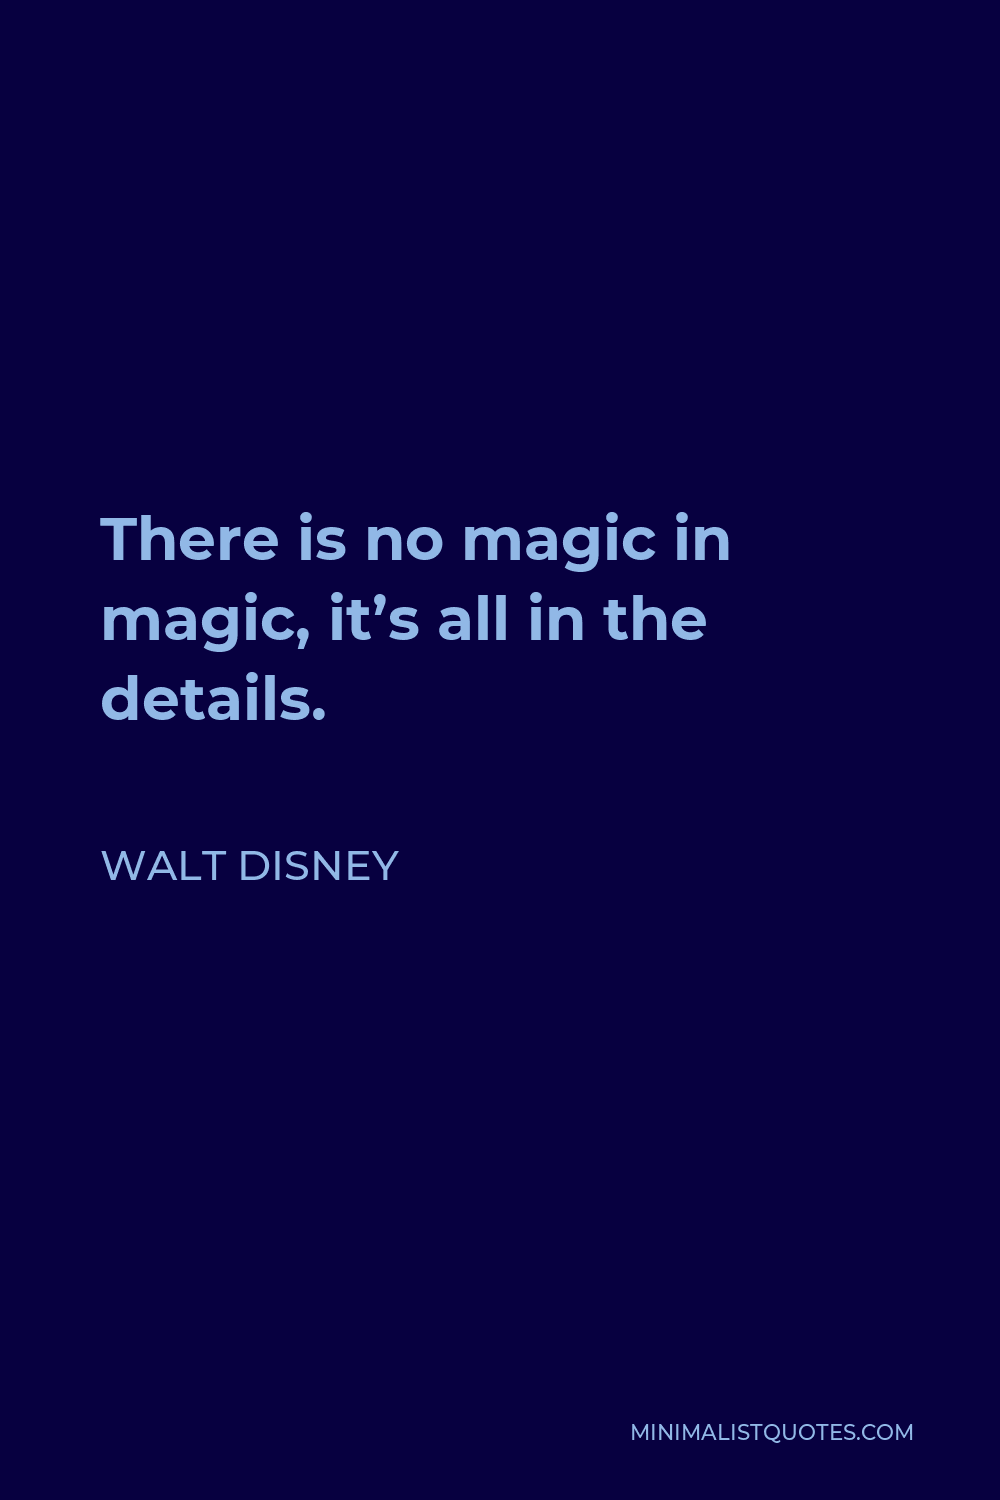 Walt Disney Quote - There is no magic in magic, it’s all in the details.